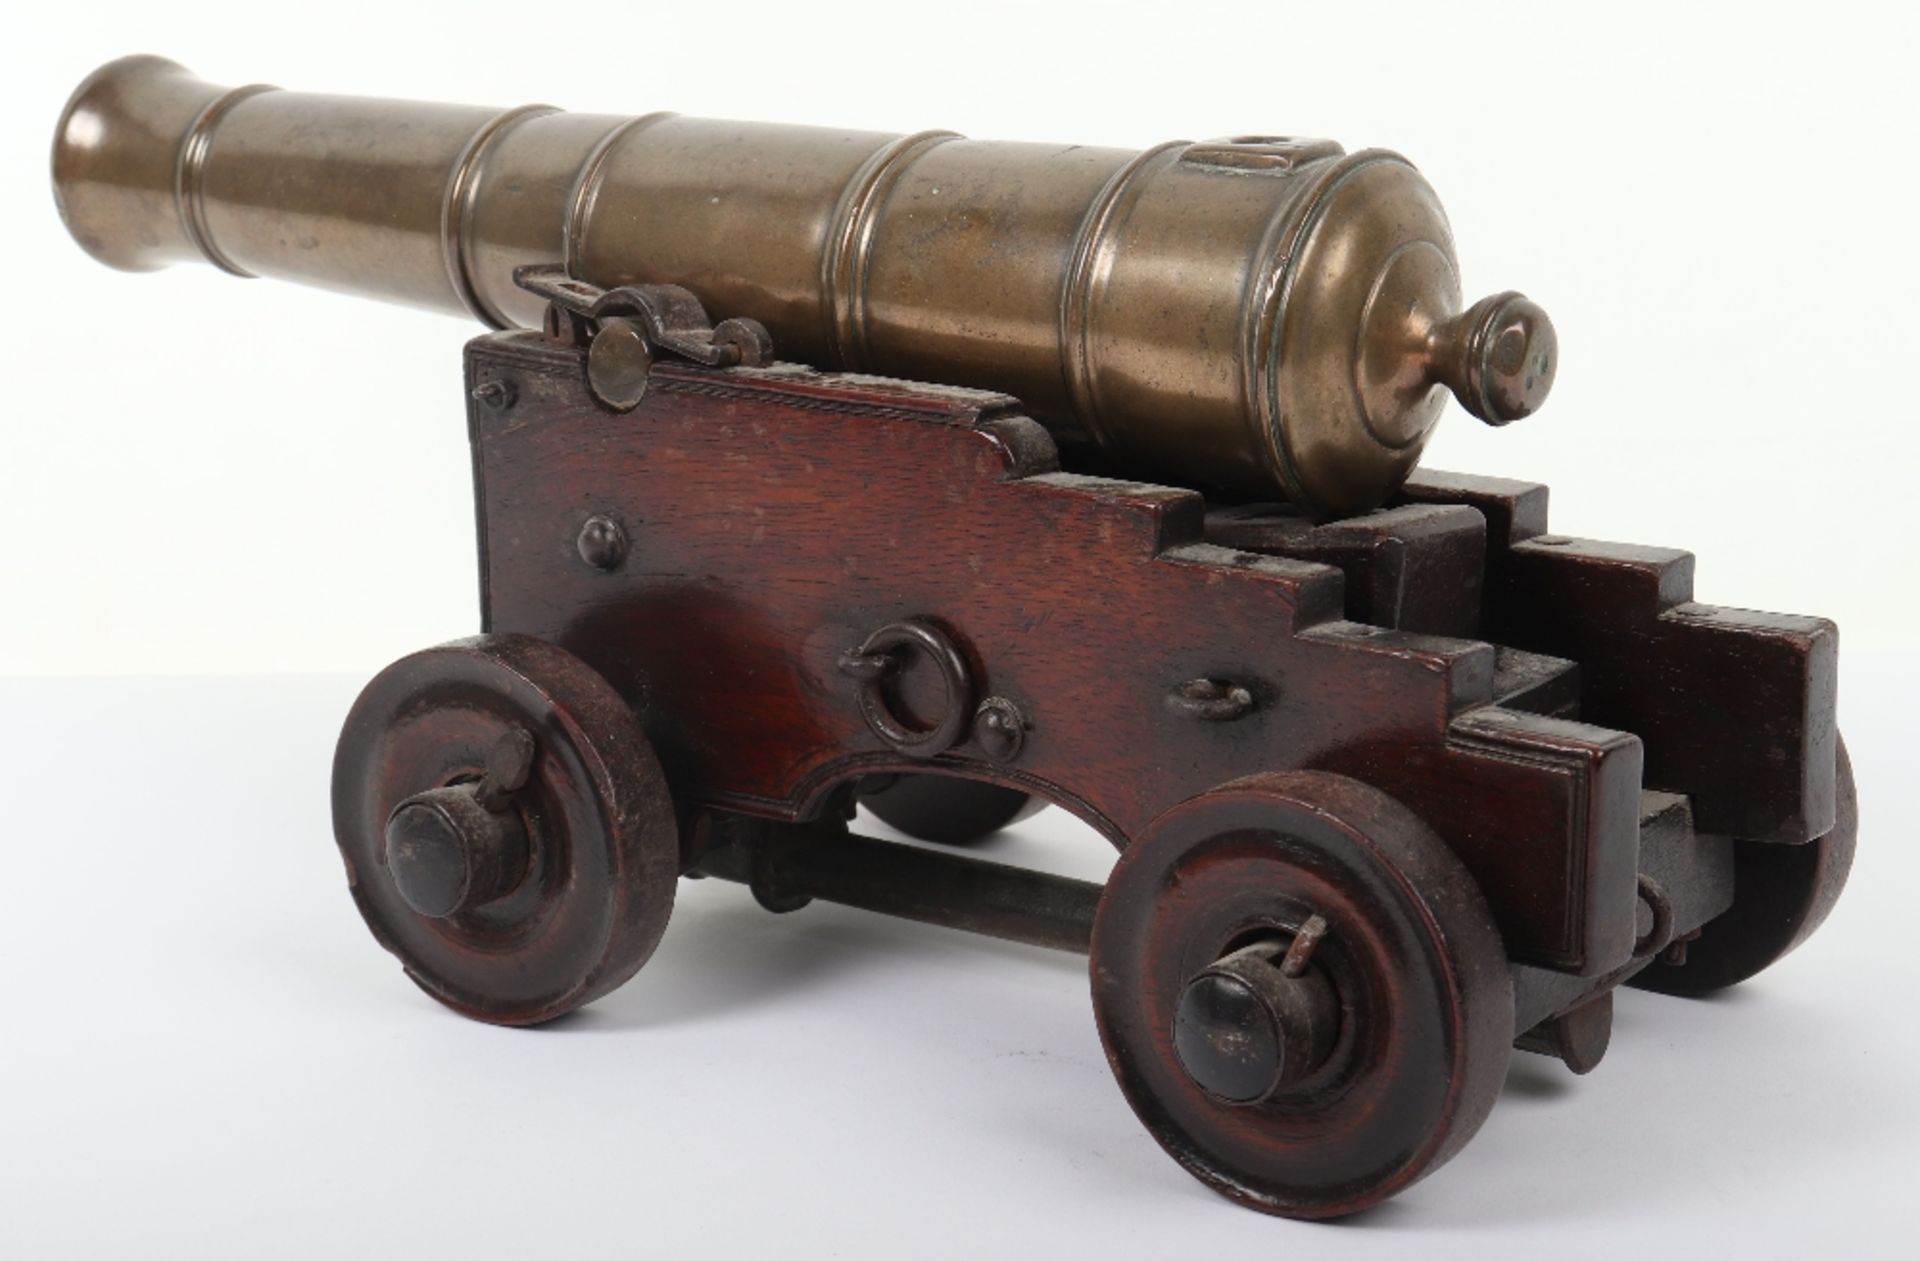 Contemporary Model of a Ships Cannon - Image 3 of 6